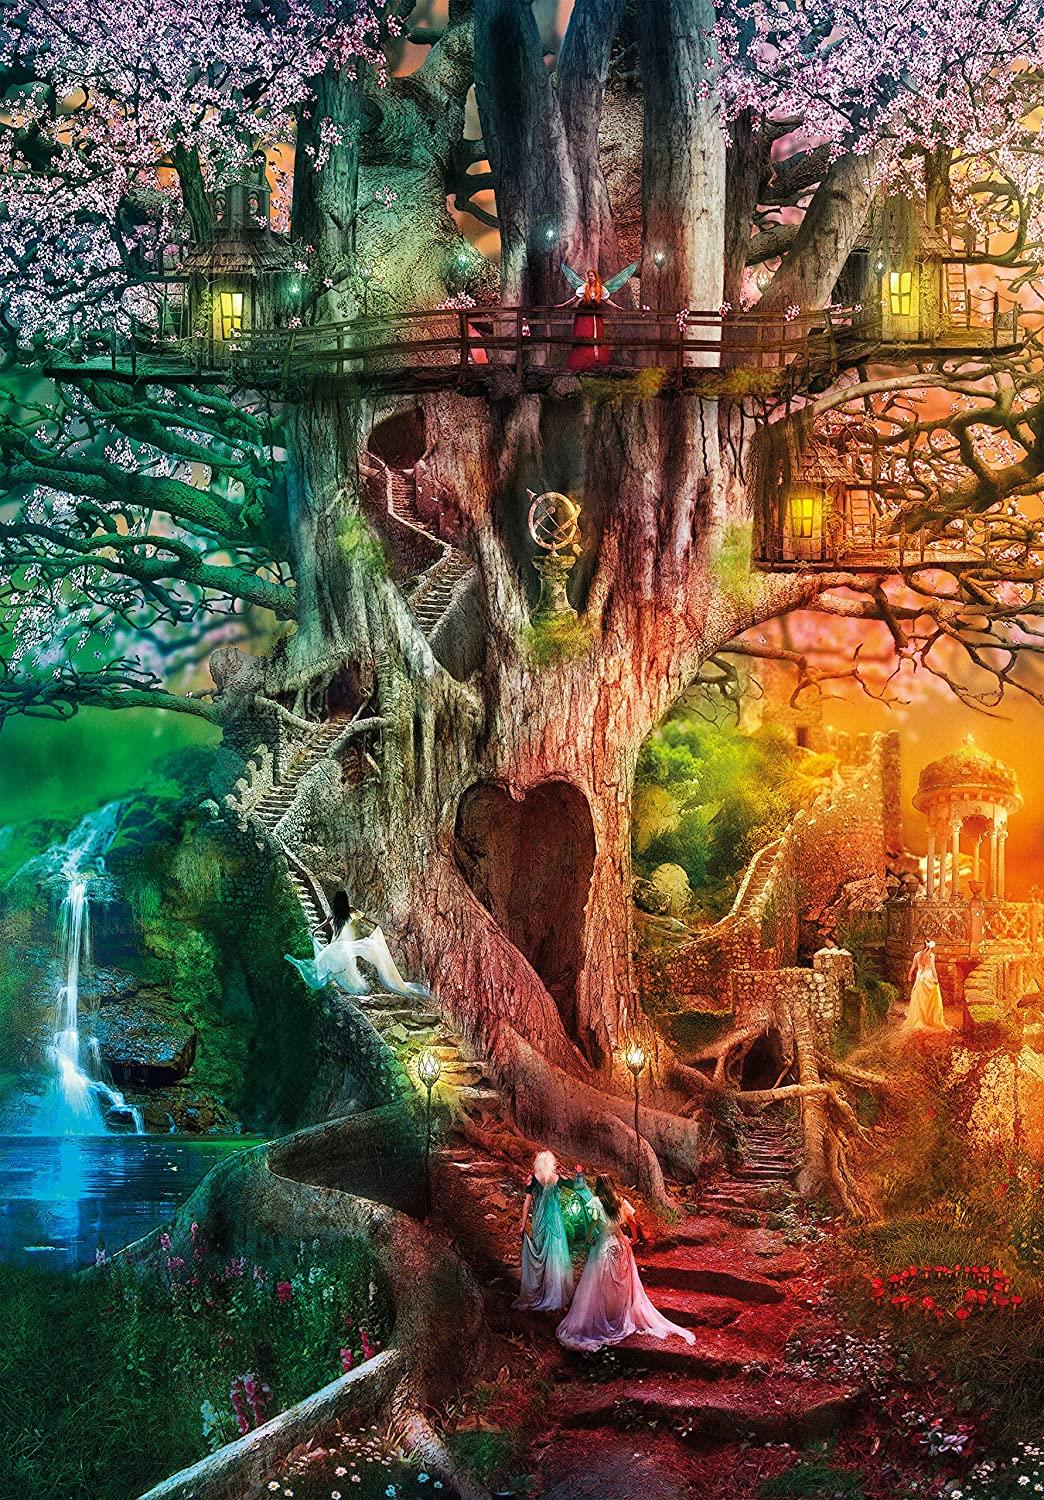 Clementoni  The Dreaming Tree High Quality Jigsaw Puzzle (1500 Pieces)